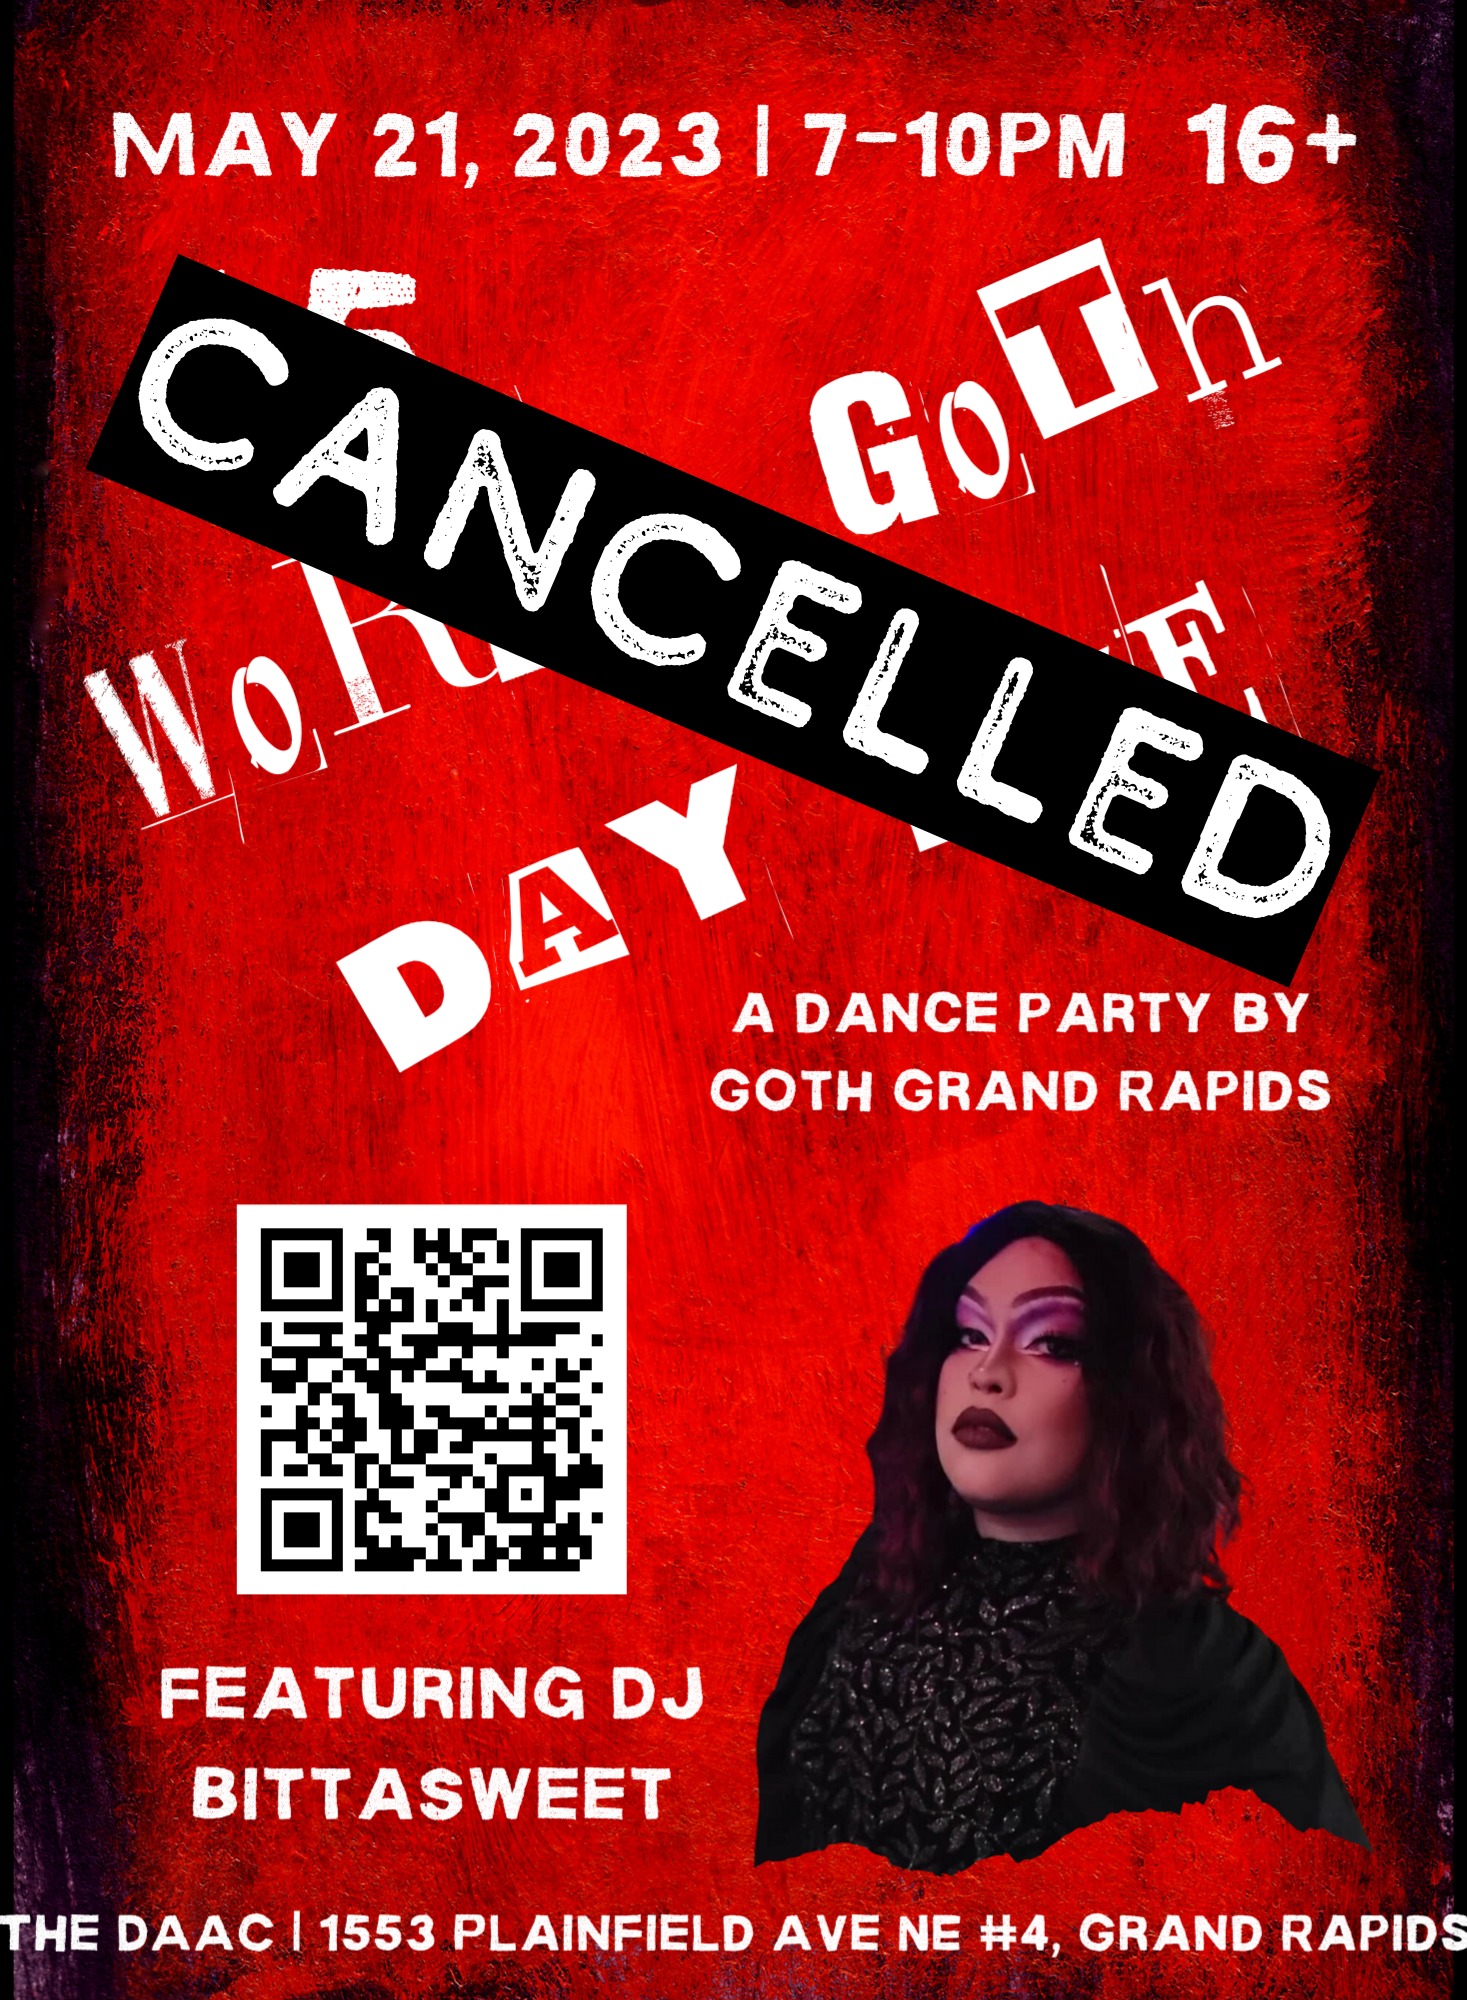 CANCELLED: May 21, 2023 / 7-10pm 16+ $5 World Goth Day Eve